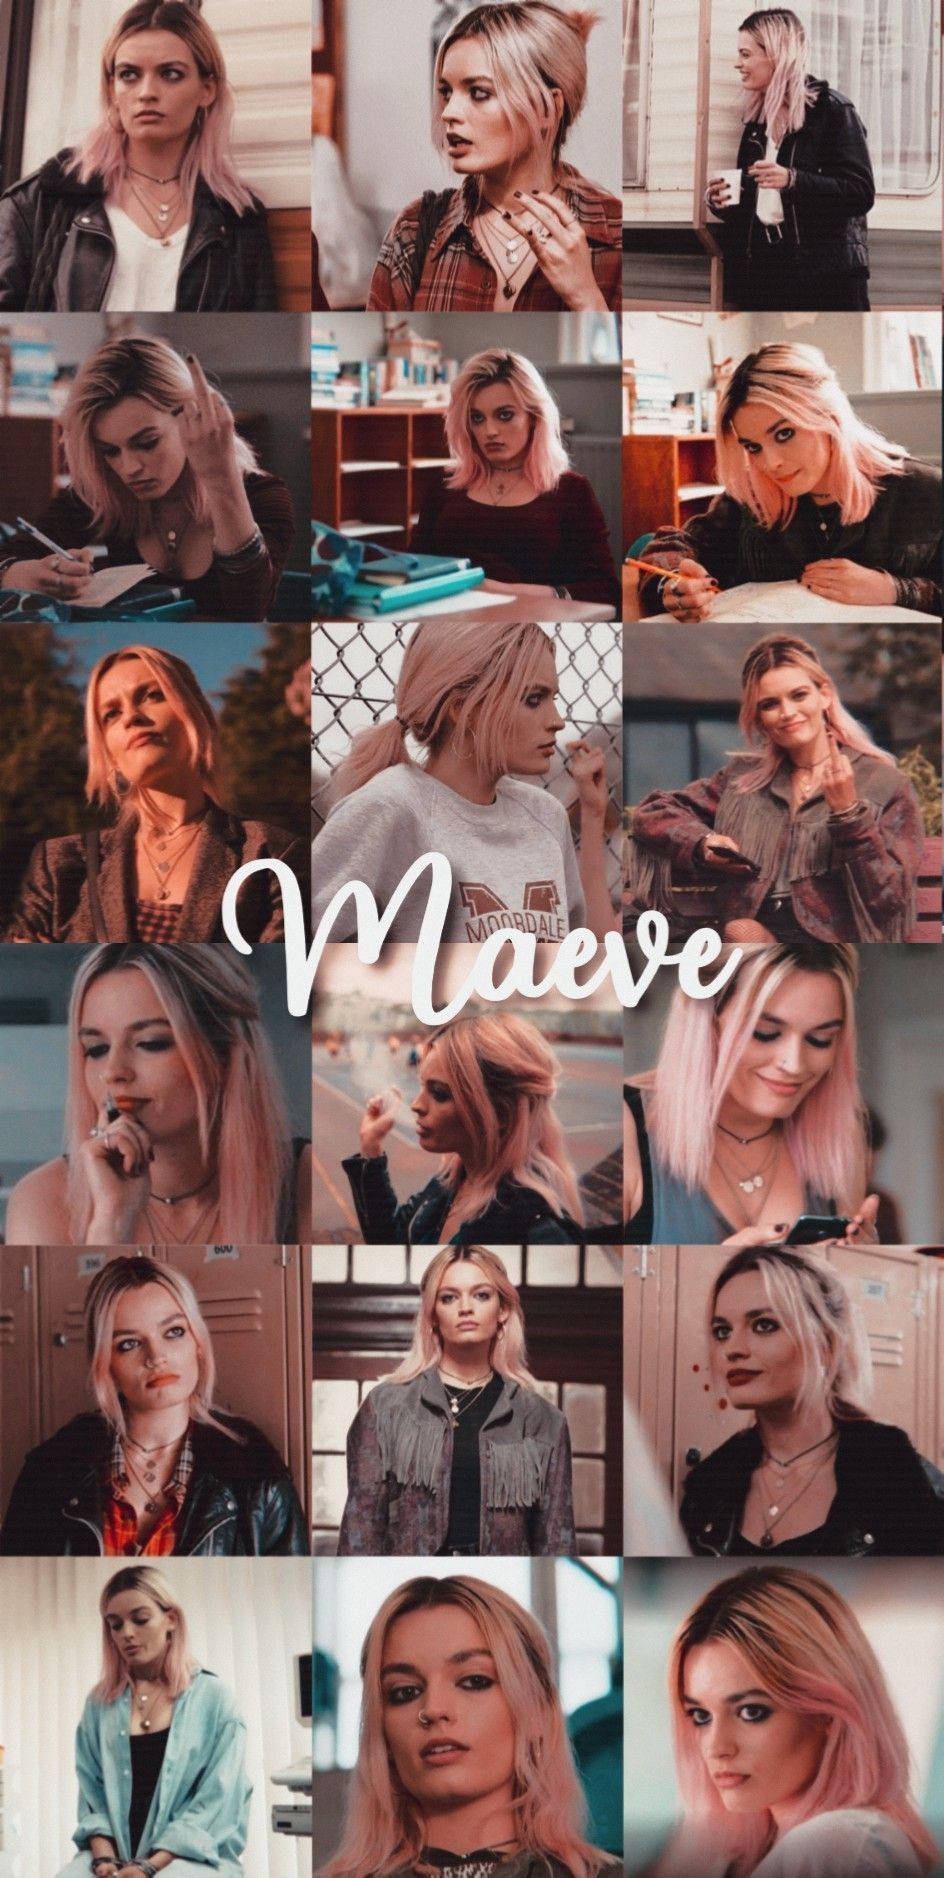 Maeve Wiley Sex Education Collage (in German: Maeve Wiley Sex Education Collage) Wallpaper